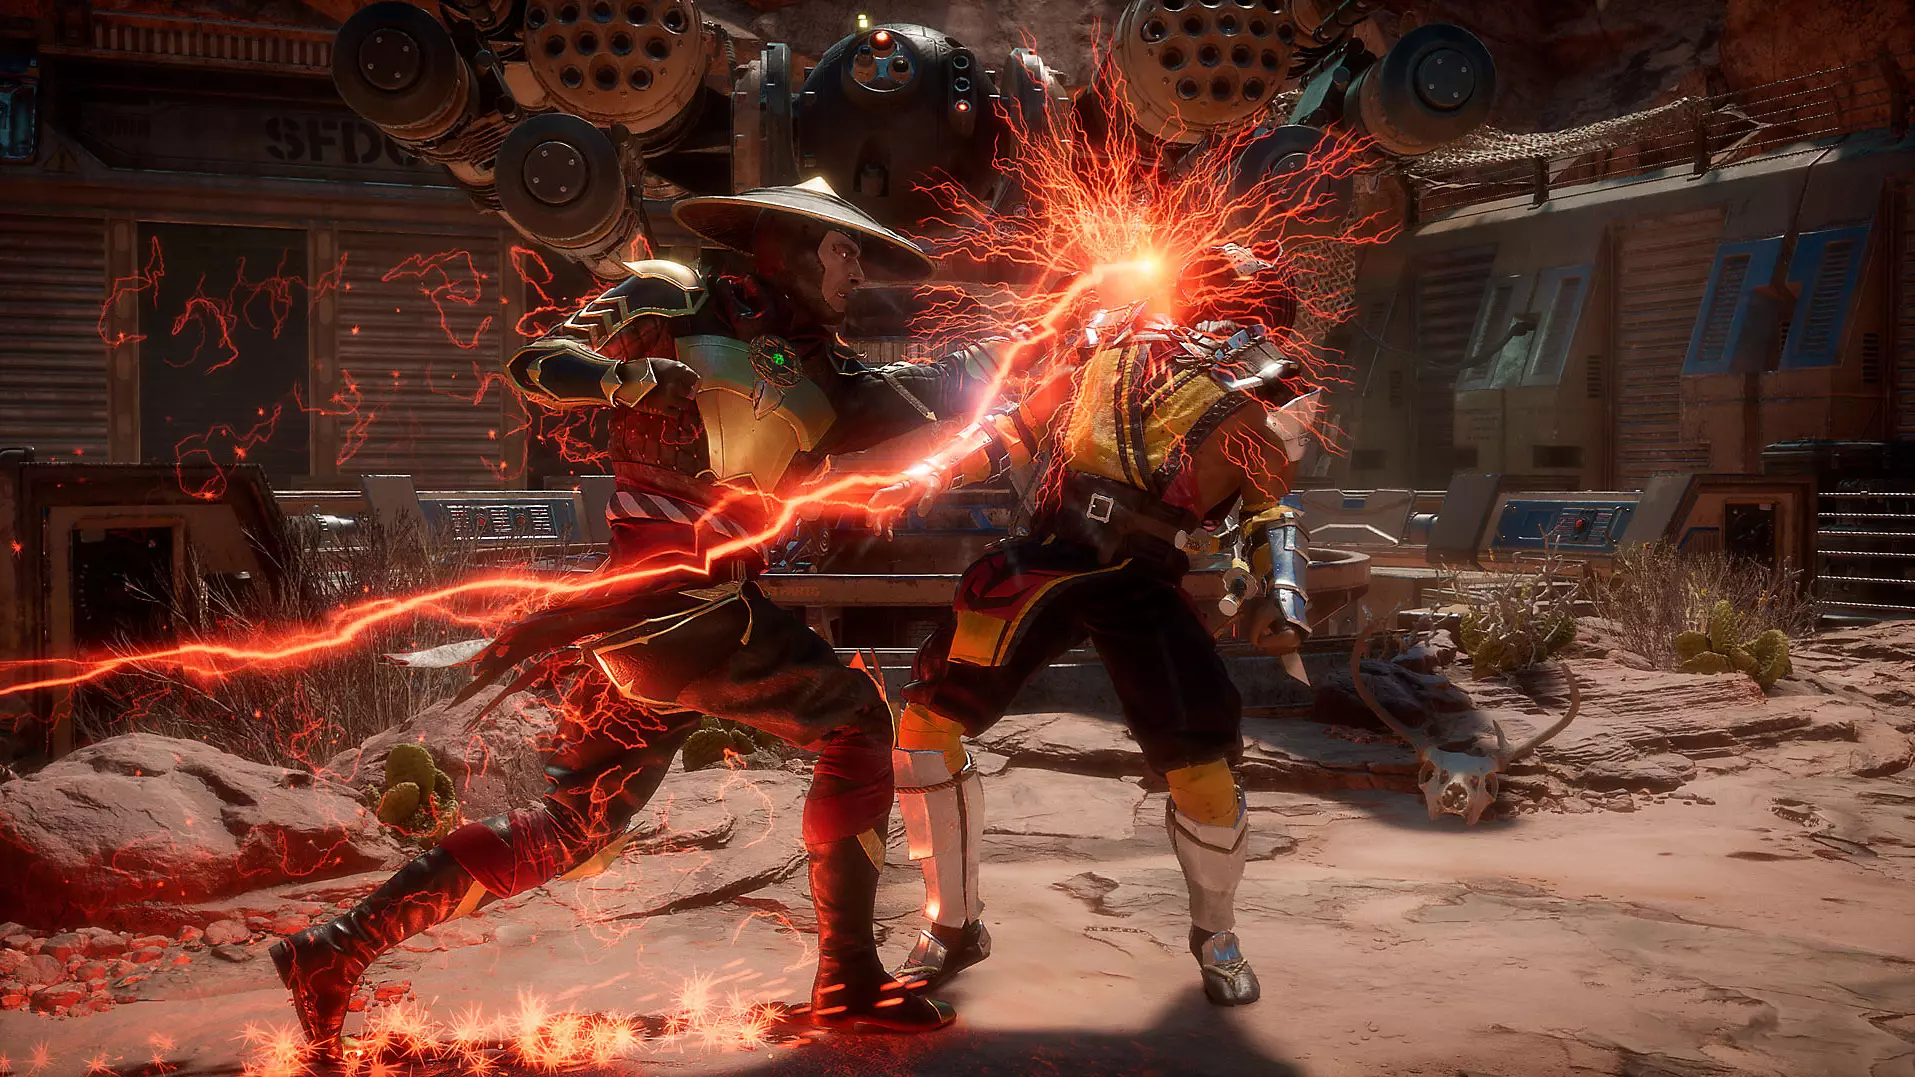 Mortal Kombat 11 Crossplay Will Be Coming Soon To PlayStation 4 And Xbox One